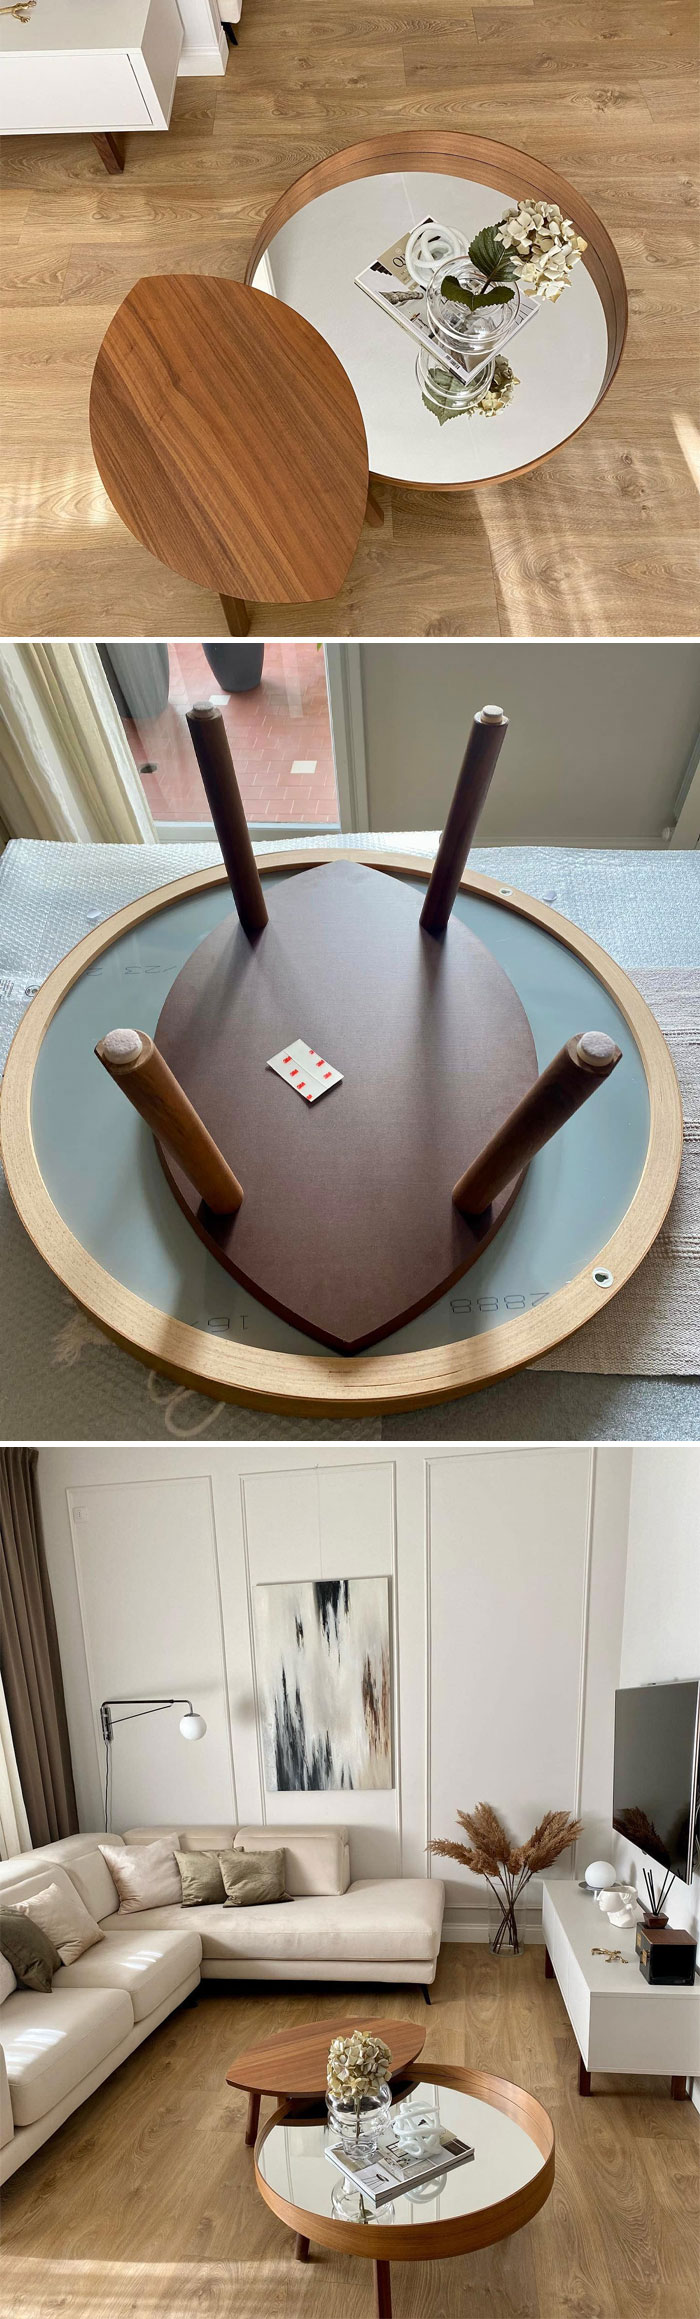 I Created A Unique Piece Of Design By Putting Together A Mirror And A Coffee Table From The Stockholm Series By IKEA, I Attached Them Together With Bi-Adhesives To Avoid Ruining Them And Being Able To Reuse Them Later